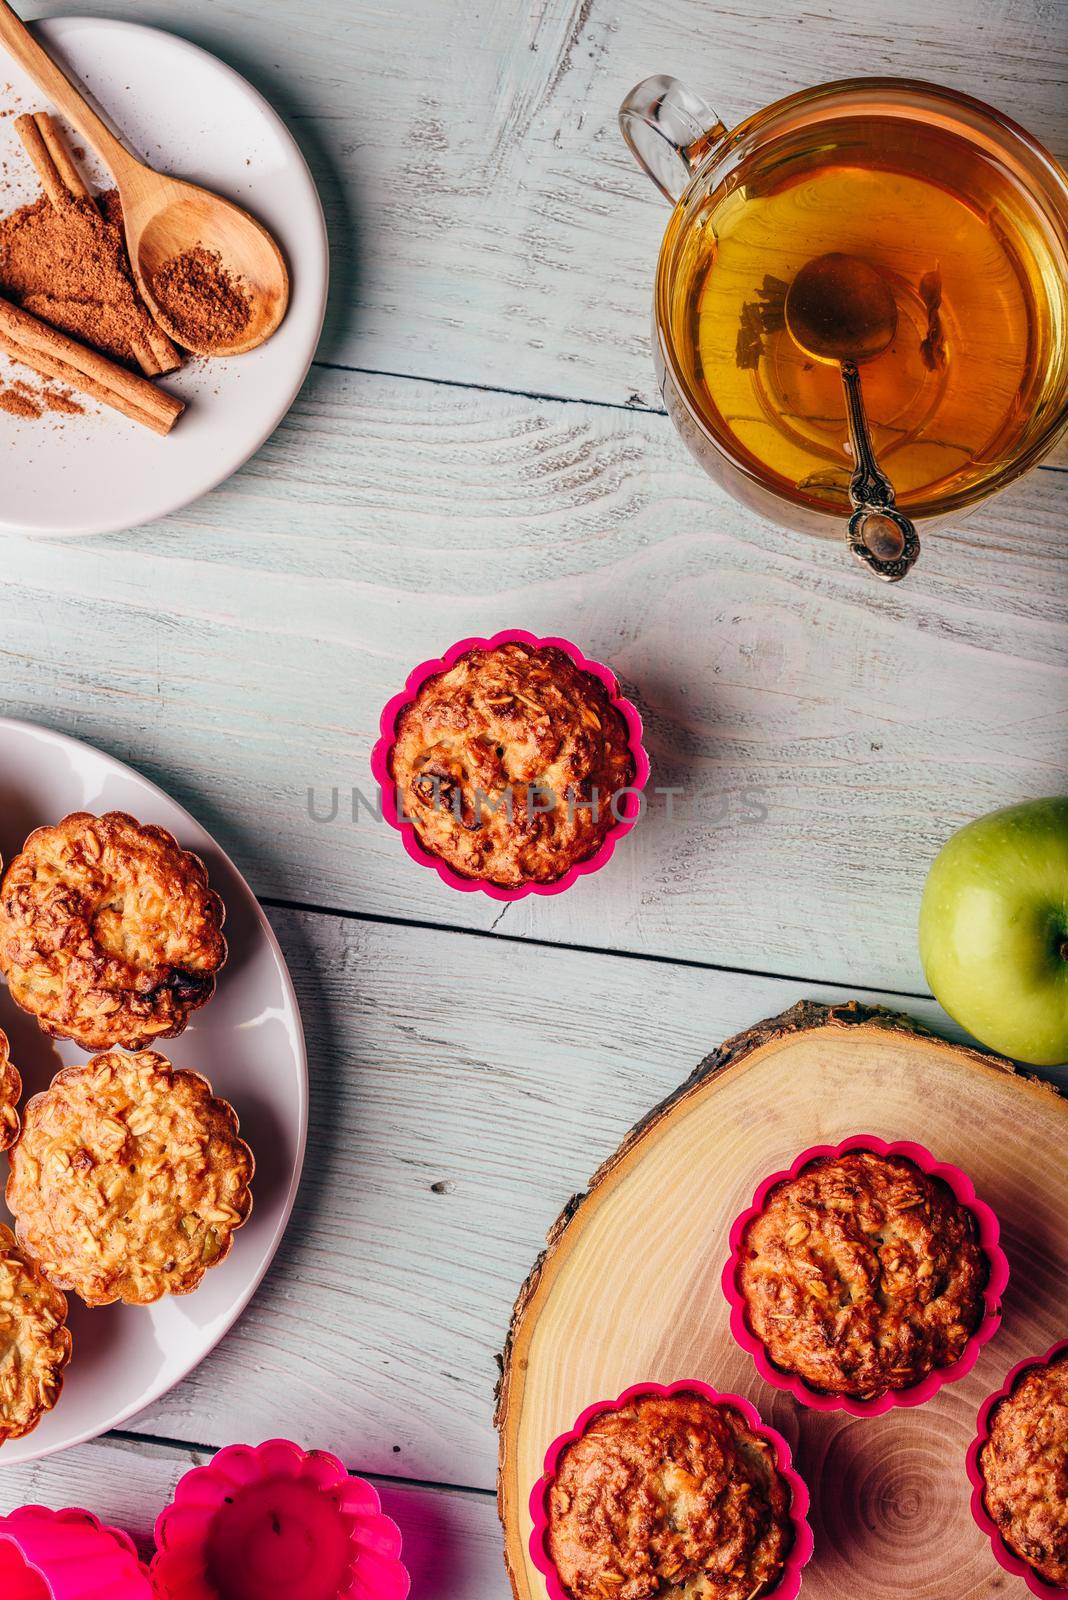 Healthy Breakfast. Cooked oatmeal muffins with apple and cup of green tea over light wooden background. View from above.